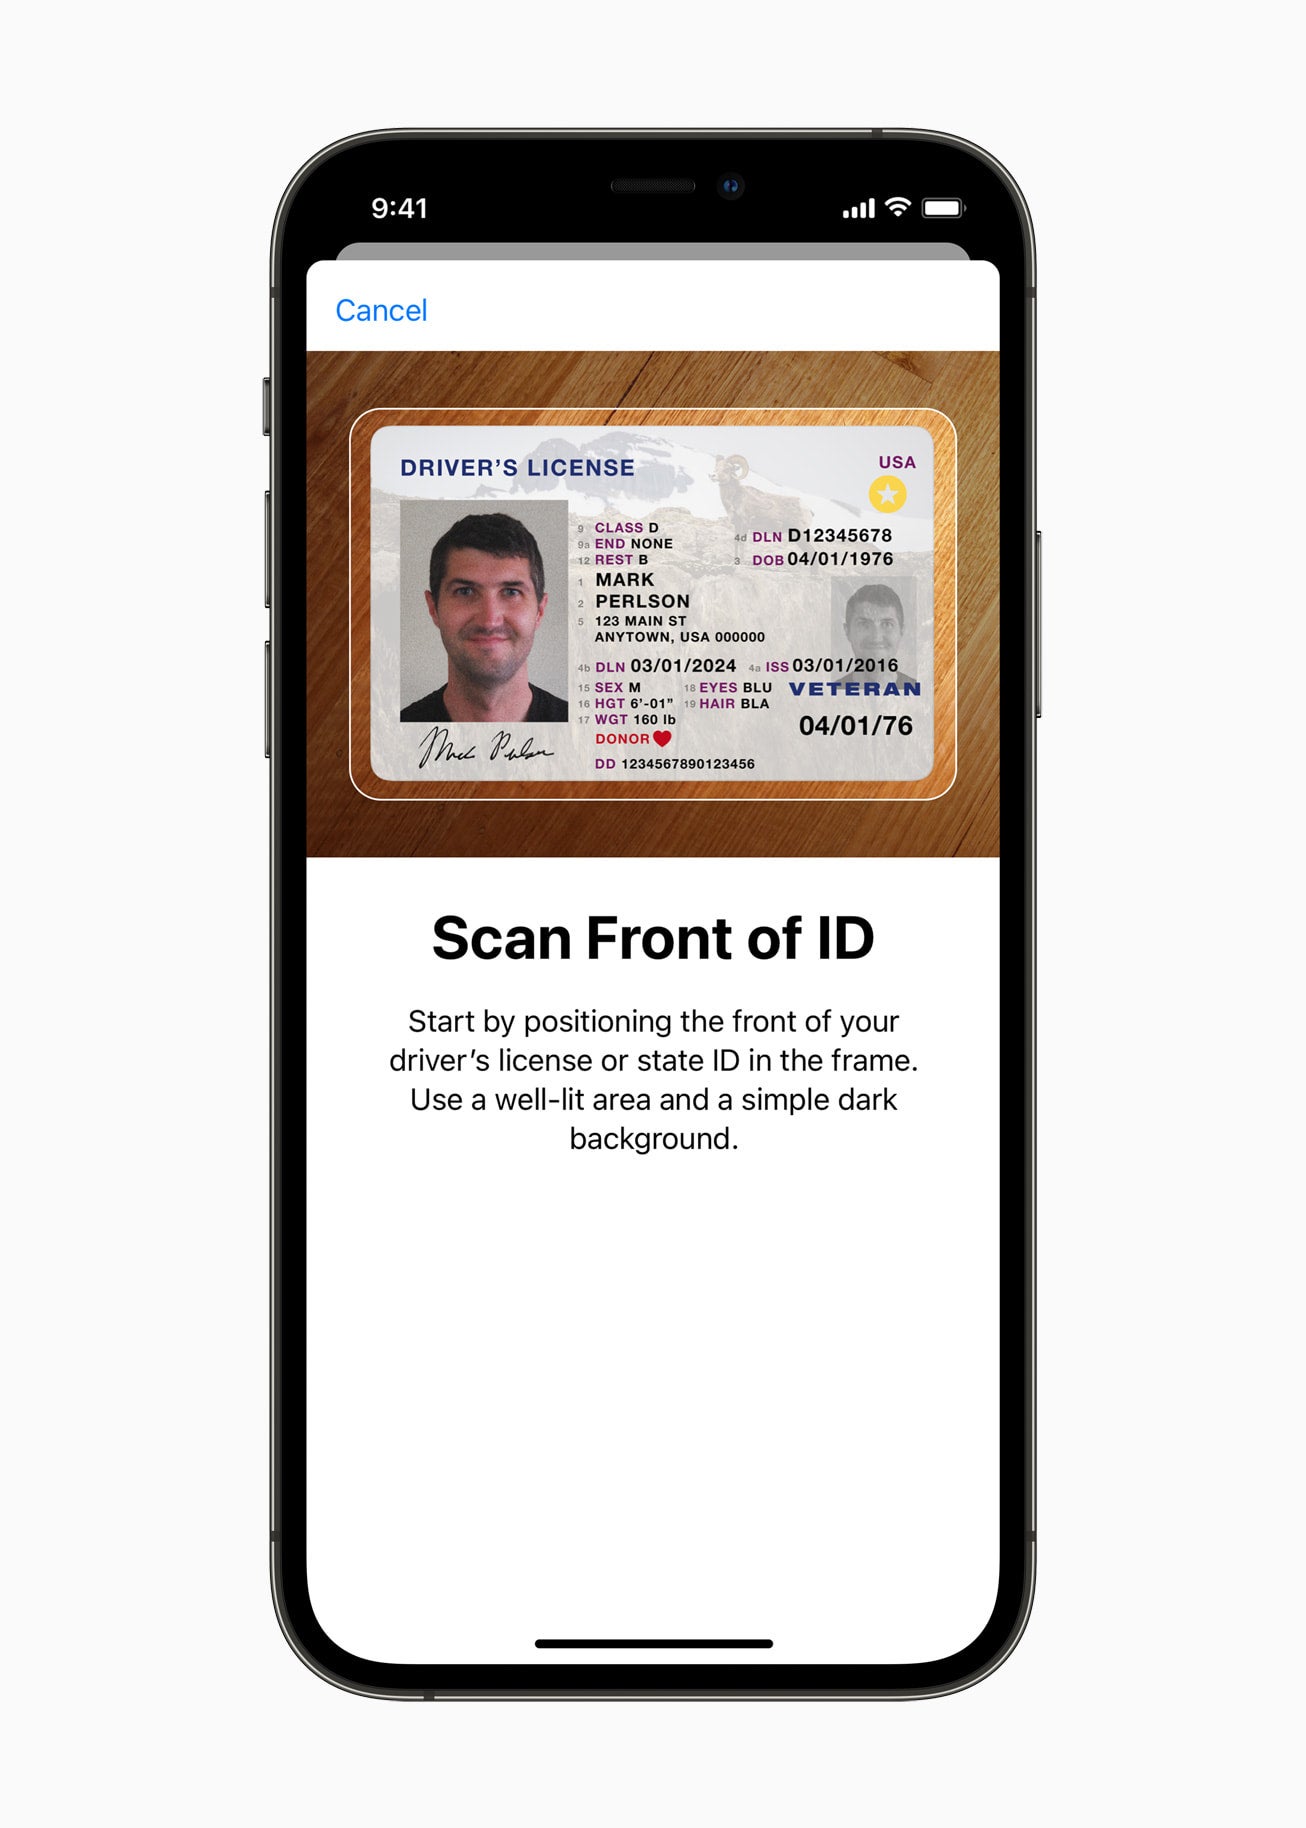 Florida to roll out digital drivers licenses in 2021